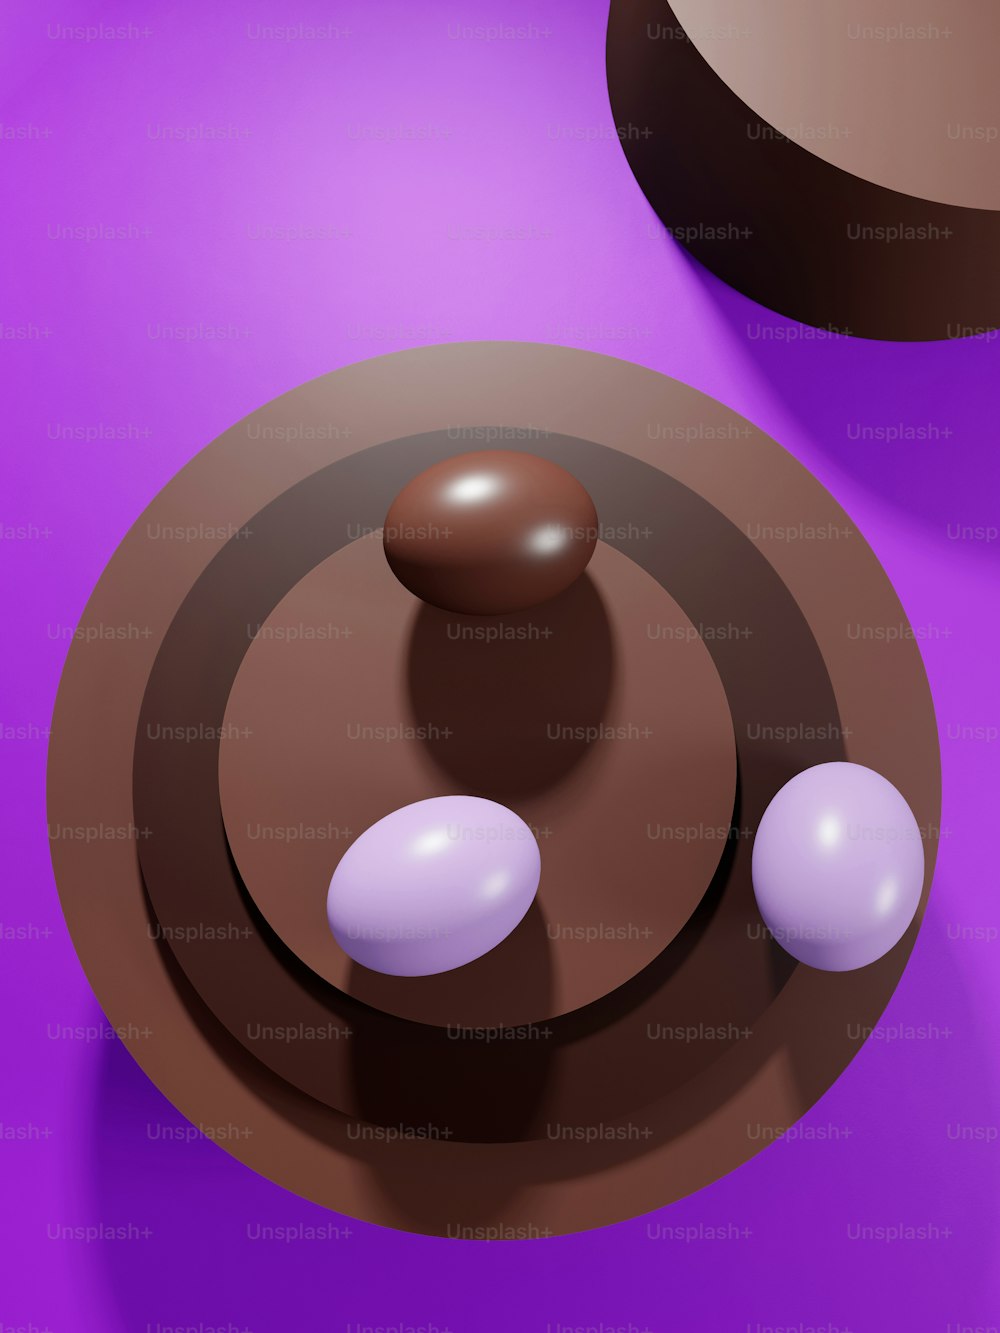 a purple and brown object on a purple surface